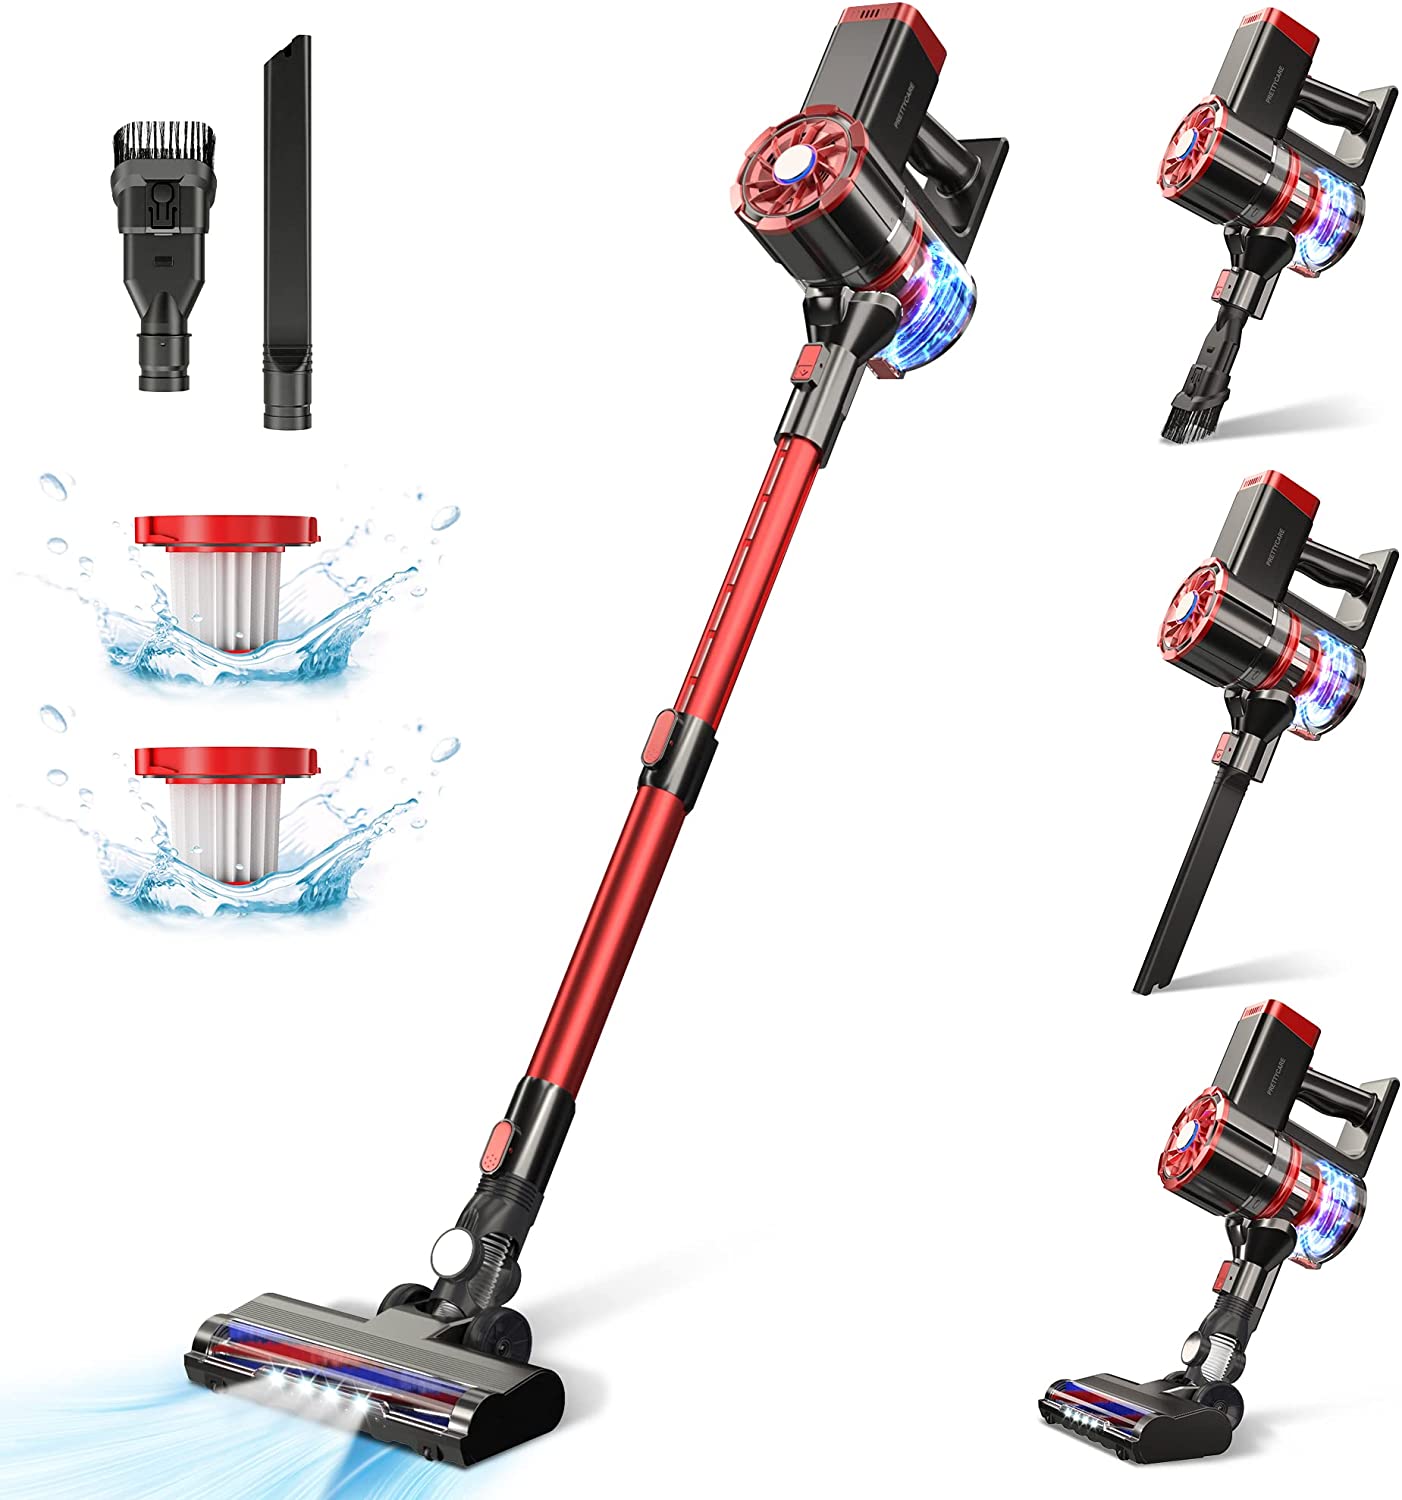 PRETTYCARE 4-Stage Filtration System LED Cordless Vacuum